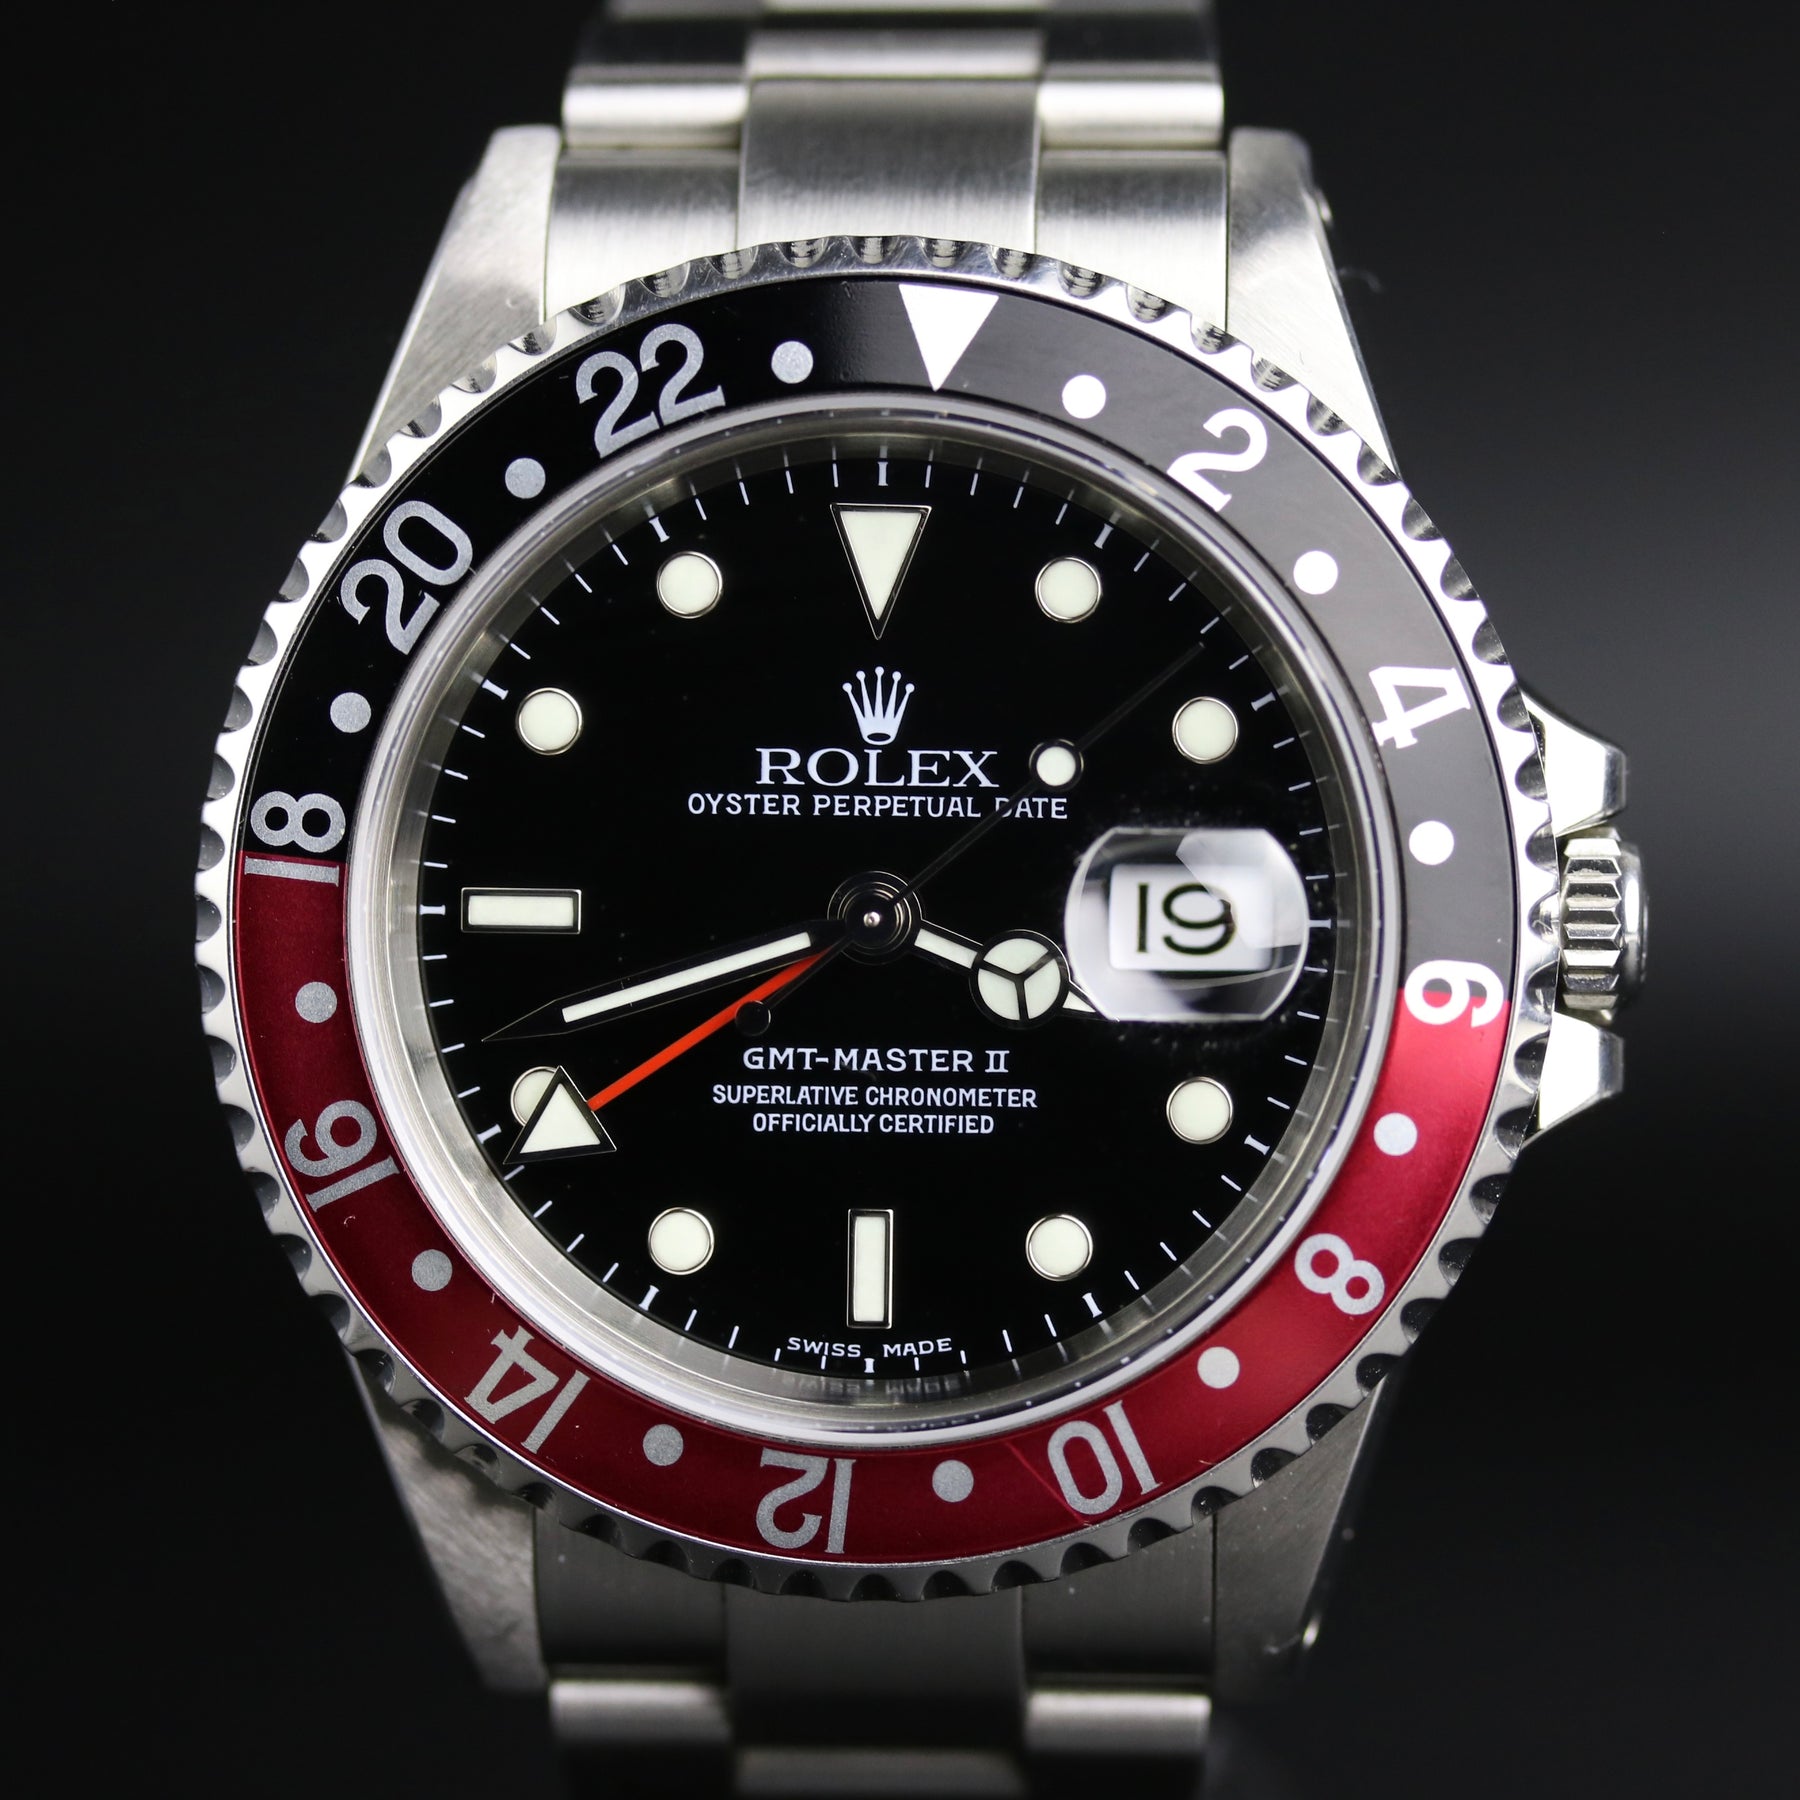 2002 Rolex 16710 GMT-MASTER II Coke Bezel with Box & Papers